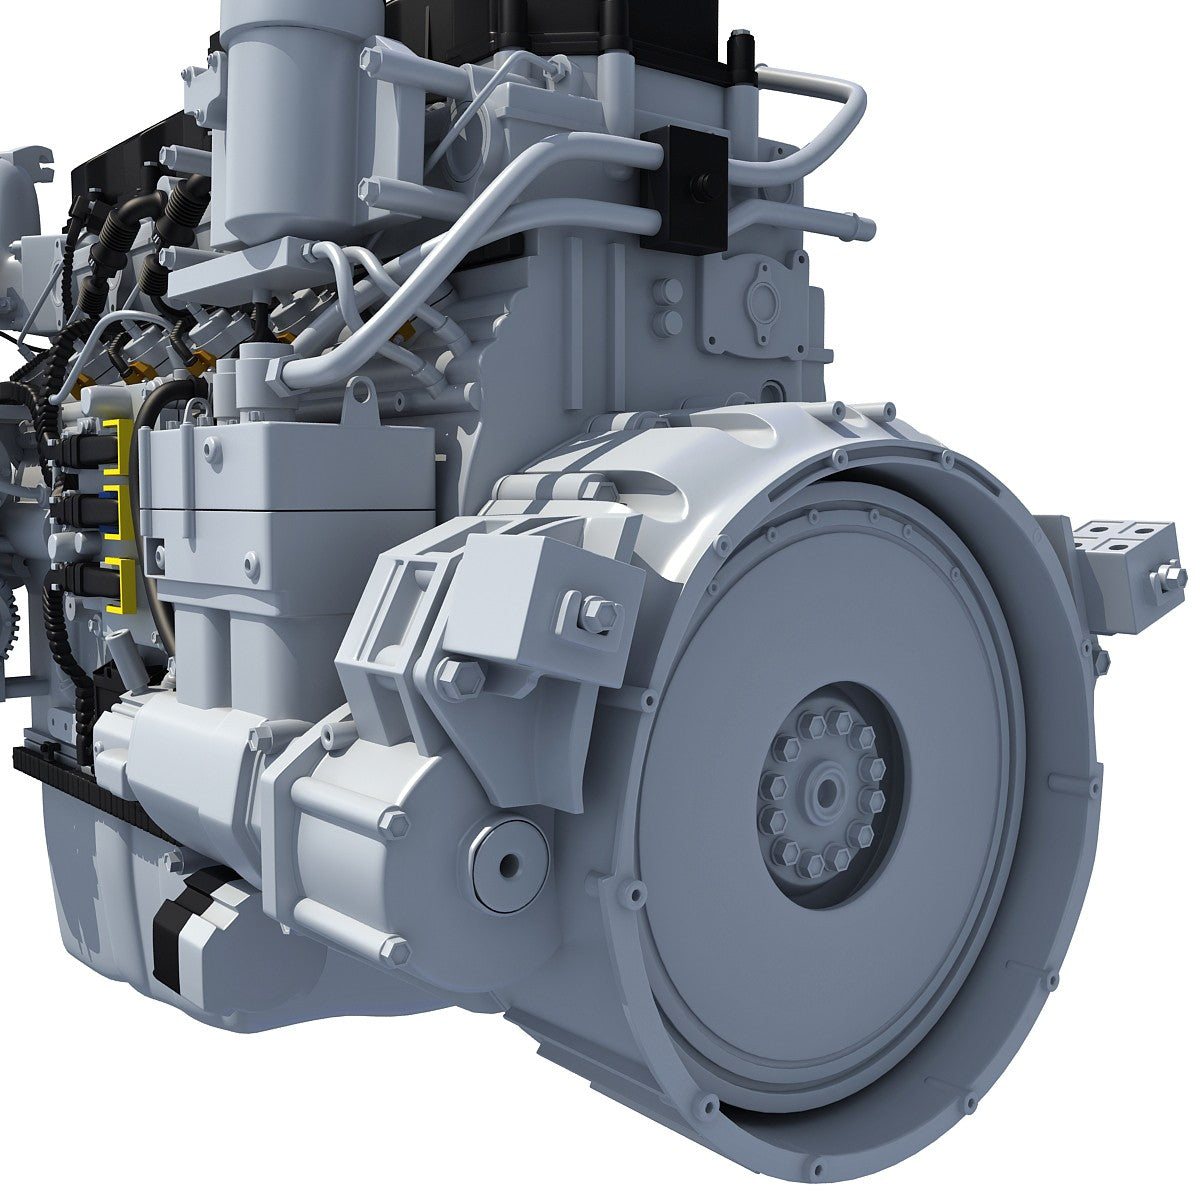 PACCAR Truck Engines